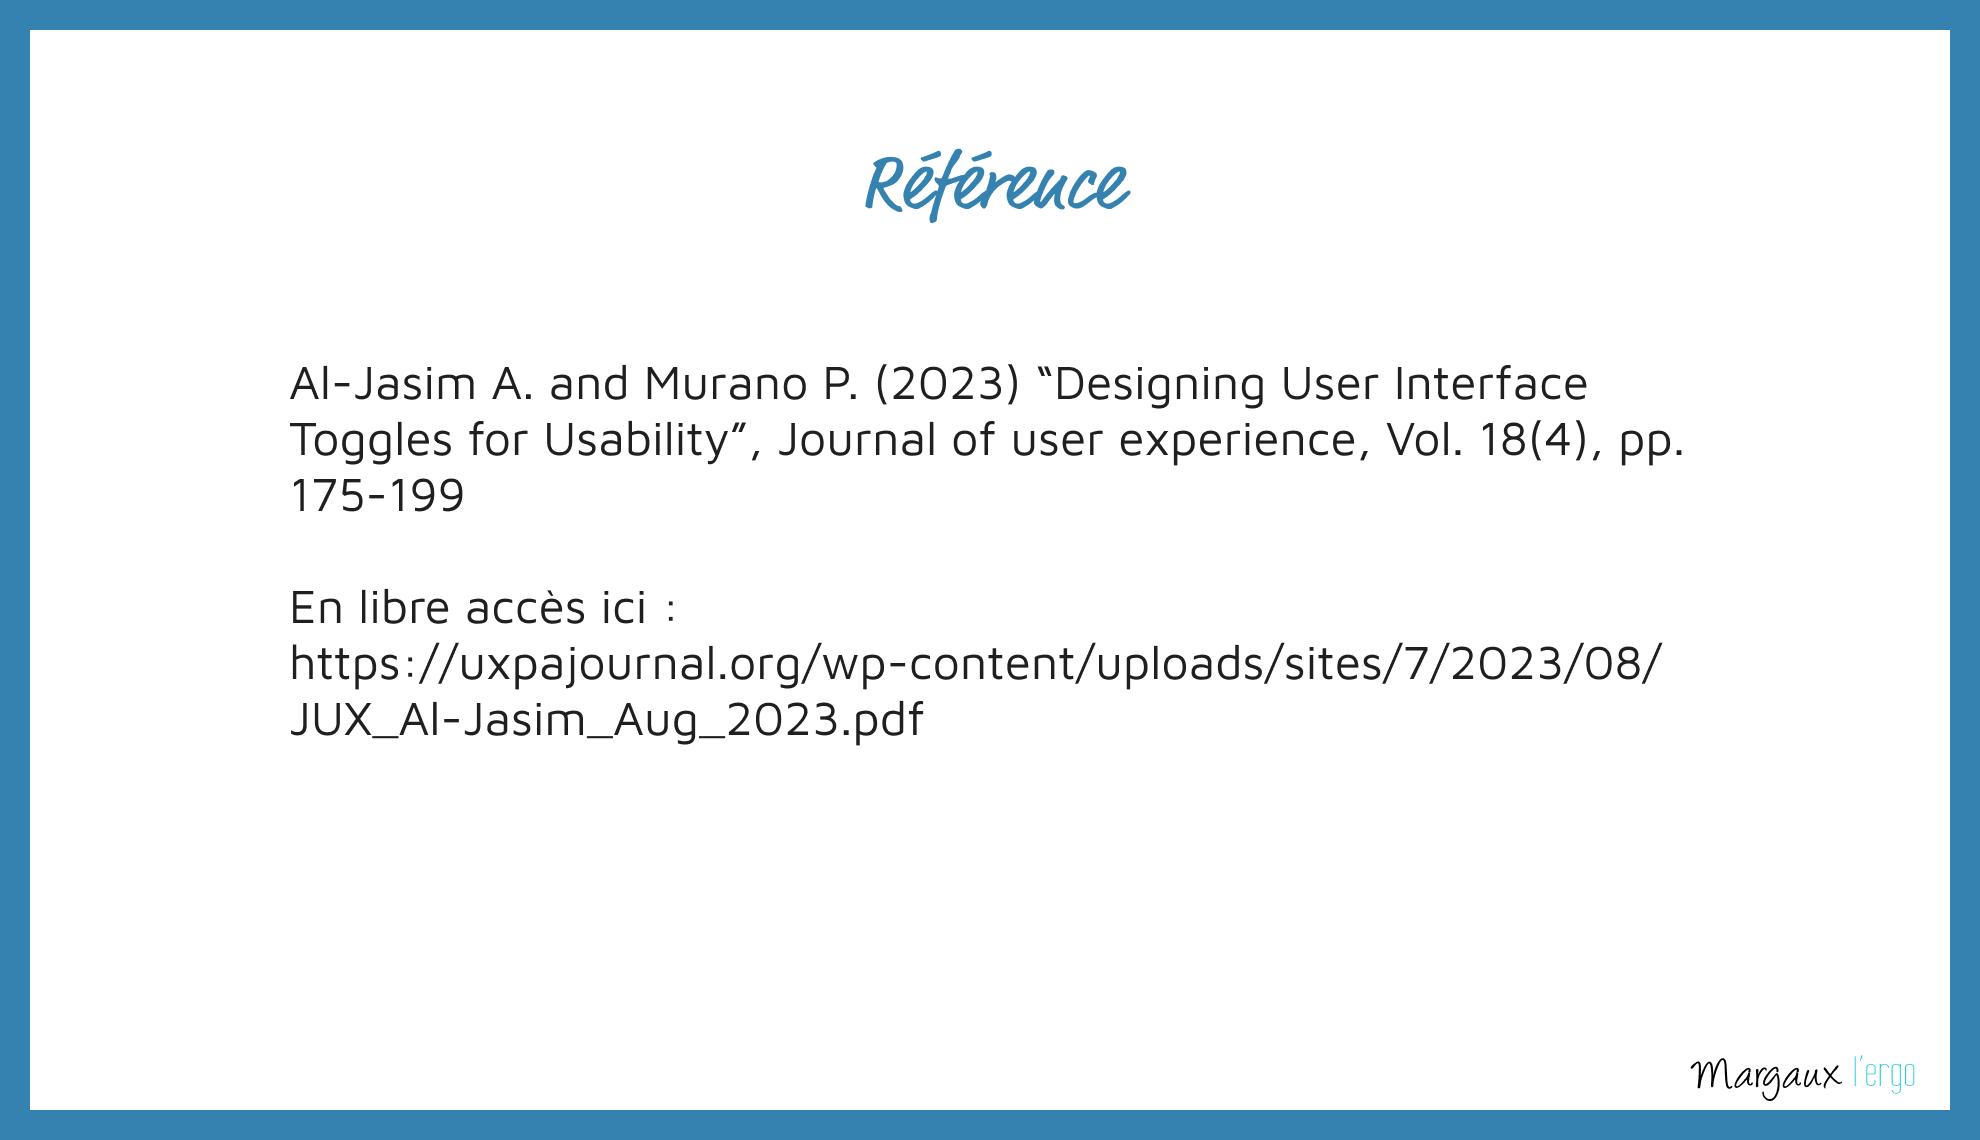 Référence : Al-Jasim A. and Murano P. (2023) “Designing User Interface Toggles for Usability”, Journal of user experience, Vol. 18(4), pp. 175-199 En libre accès sur le site de Journal of user experience (lien en bas de l'article)